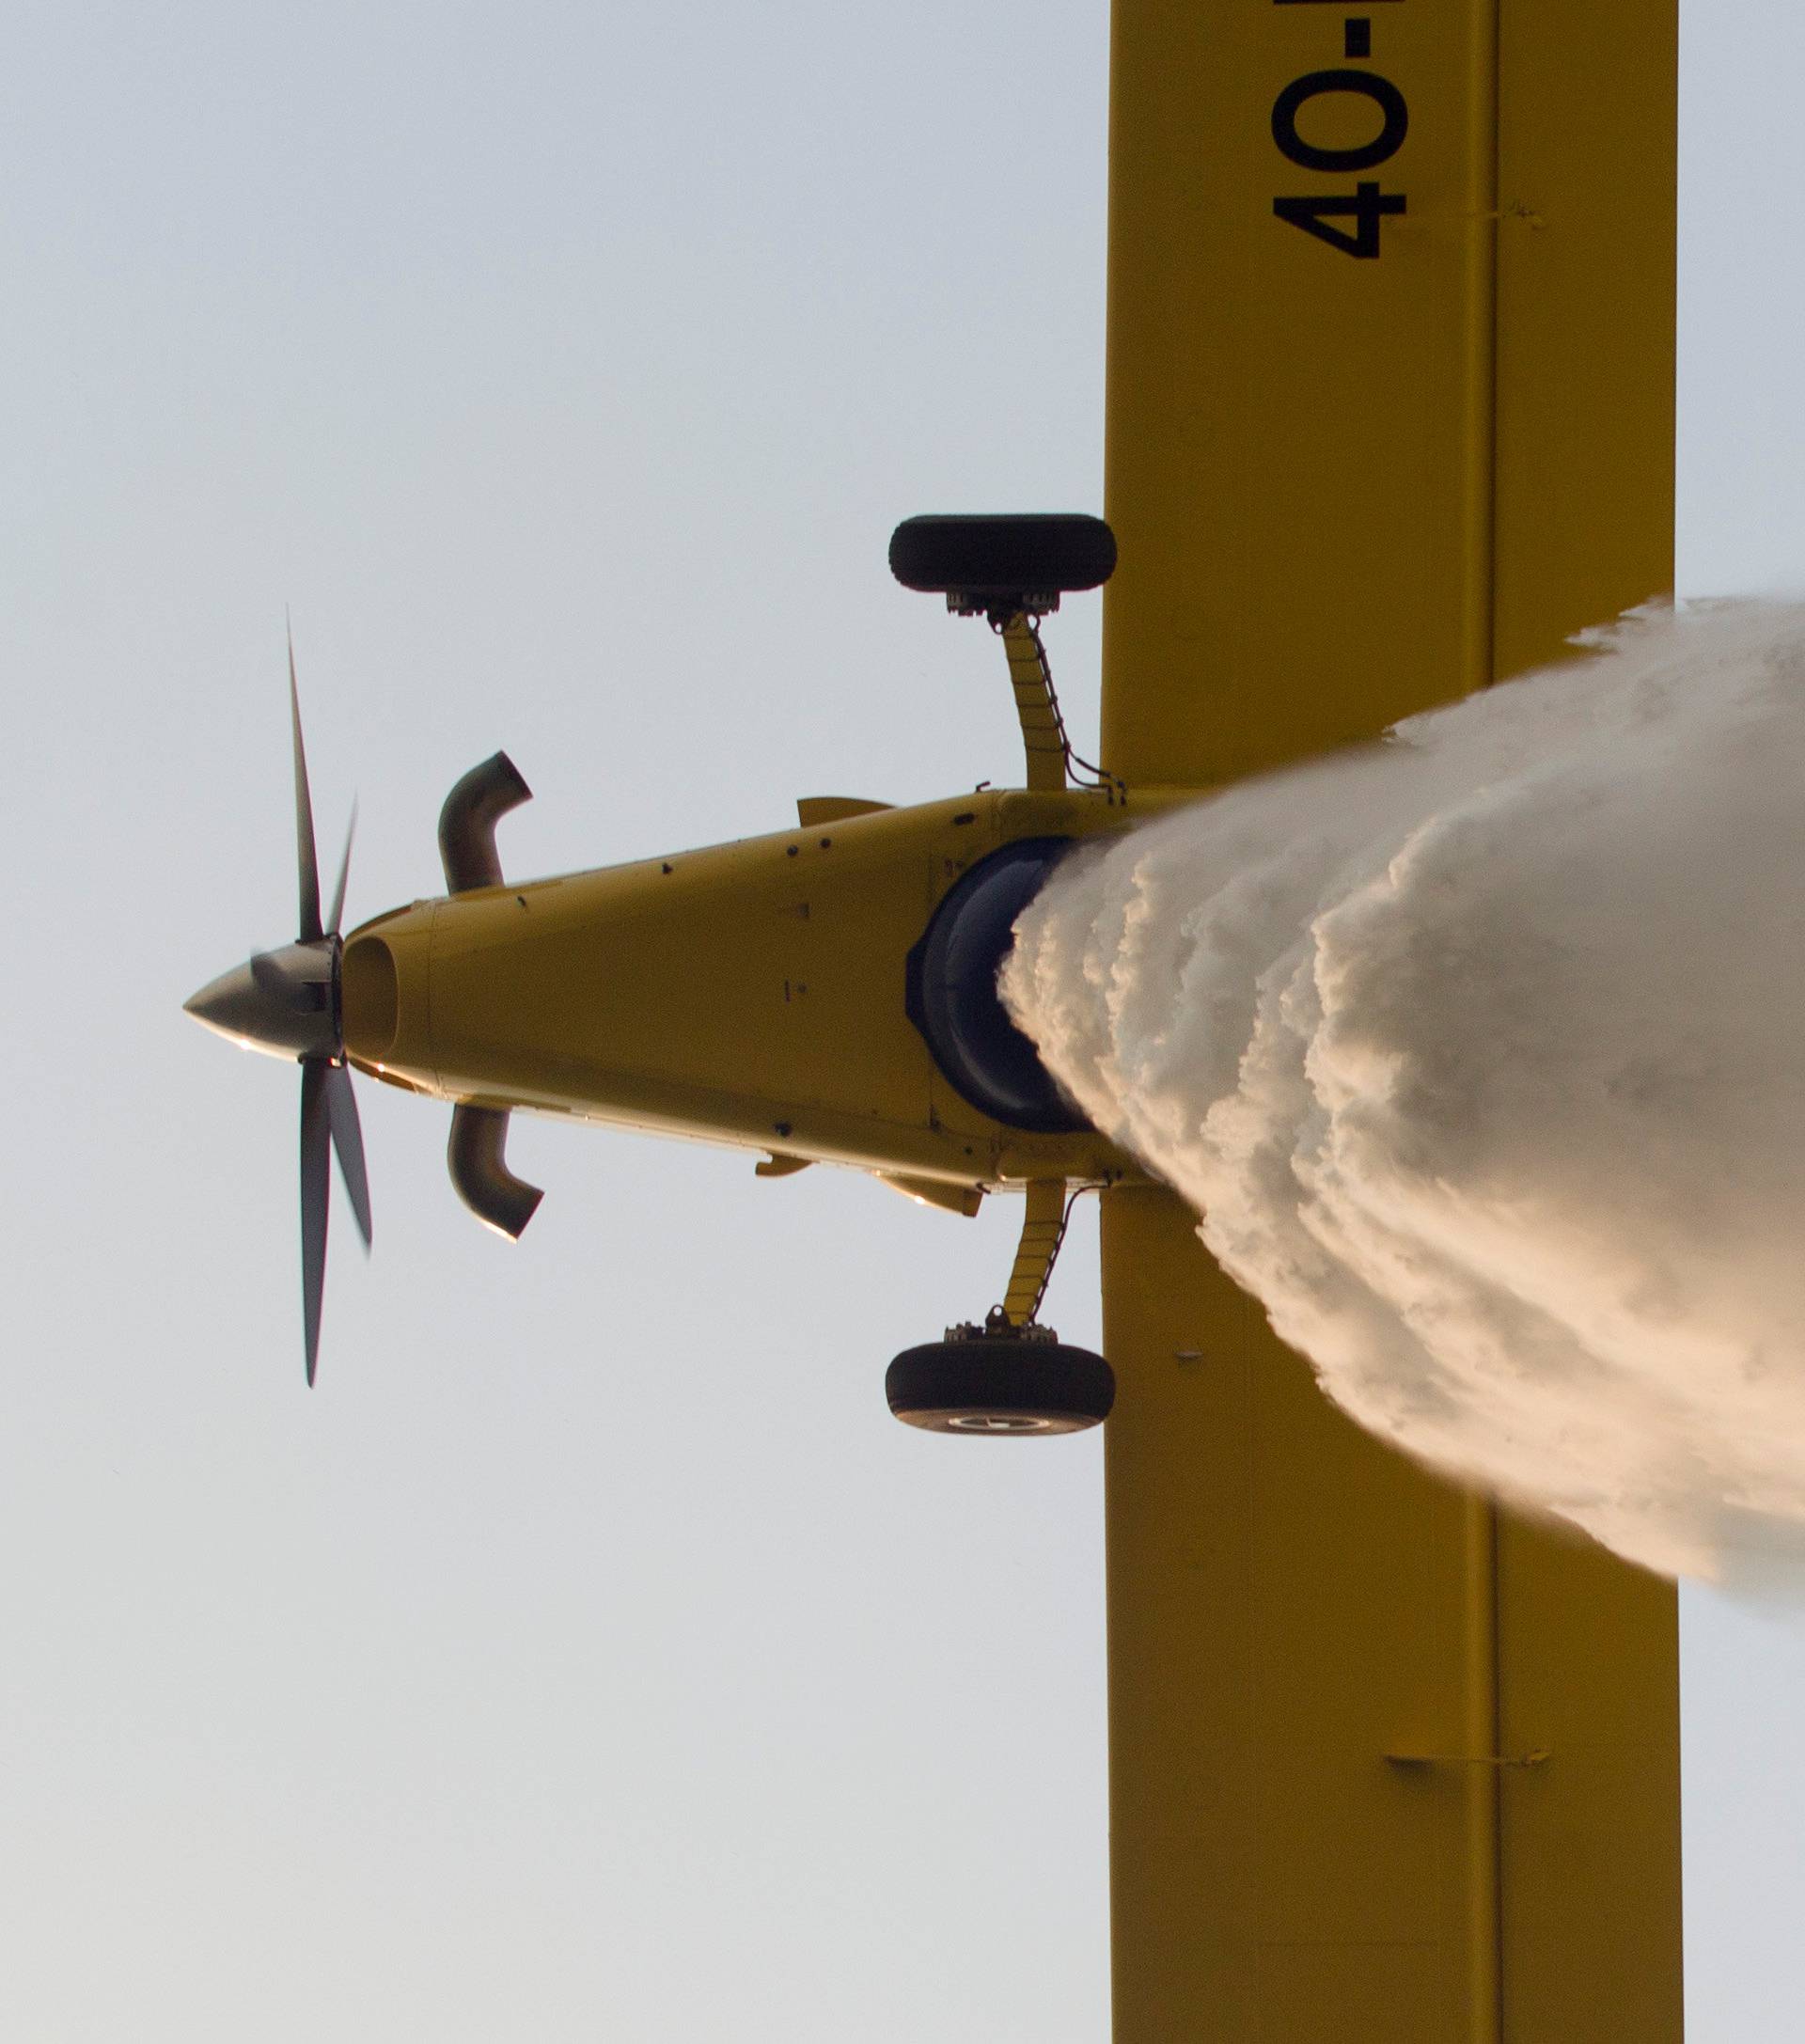 A firefighting plane drops water to extinguish a forest fire at Lustica peninsula near Tivat